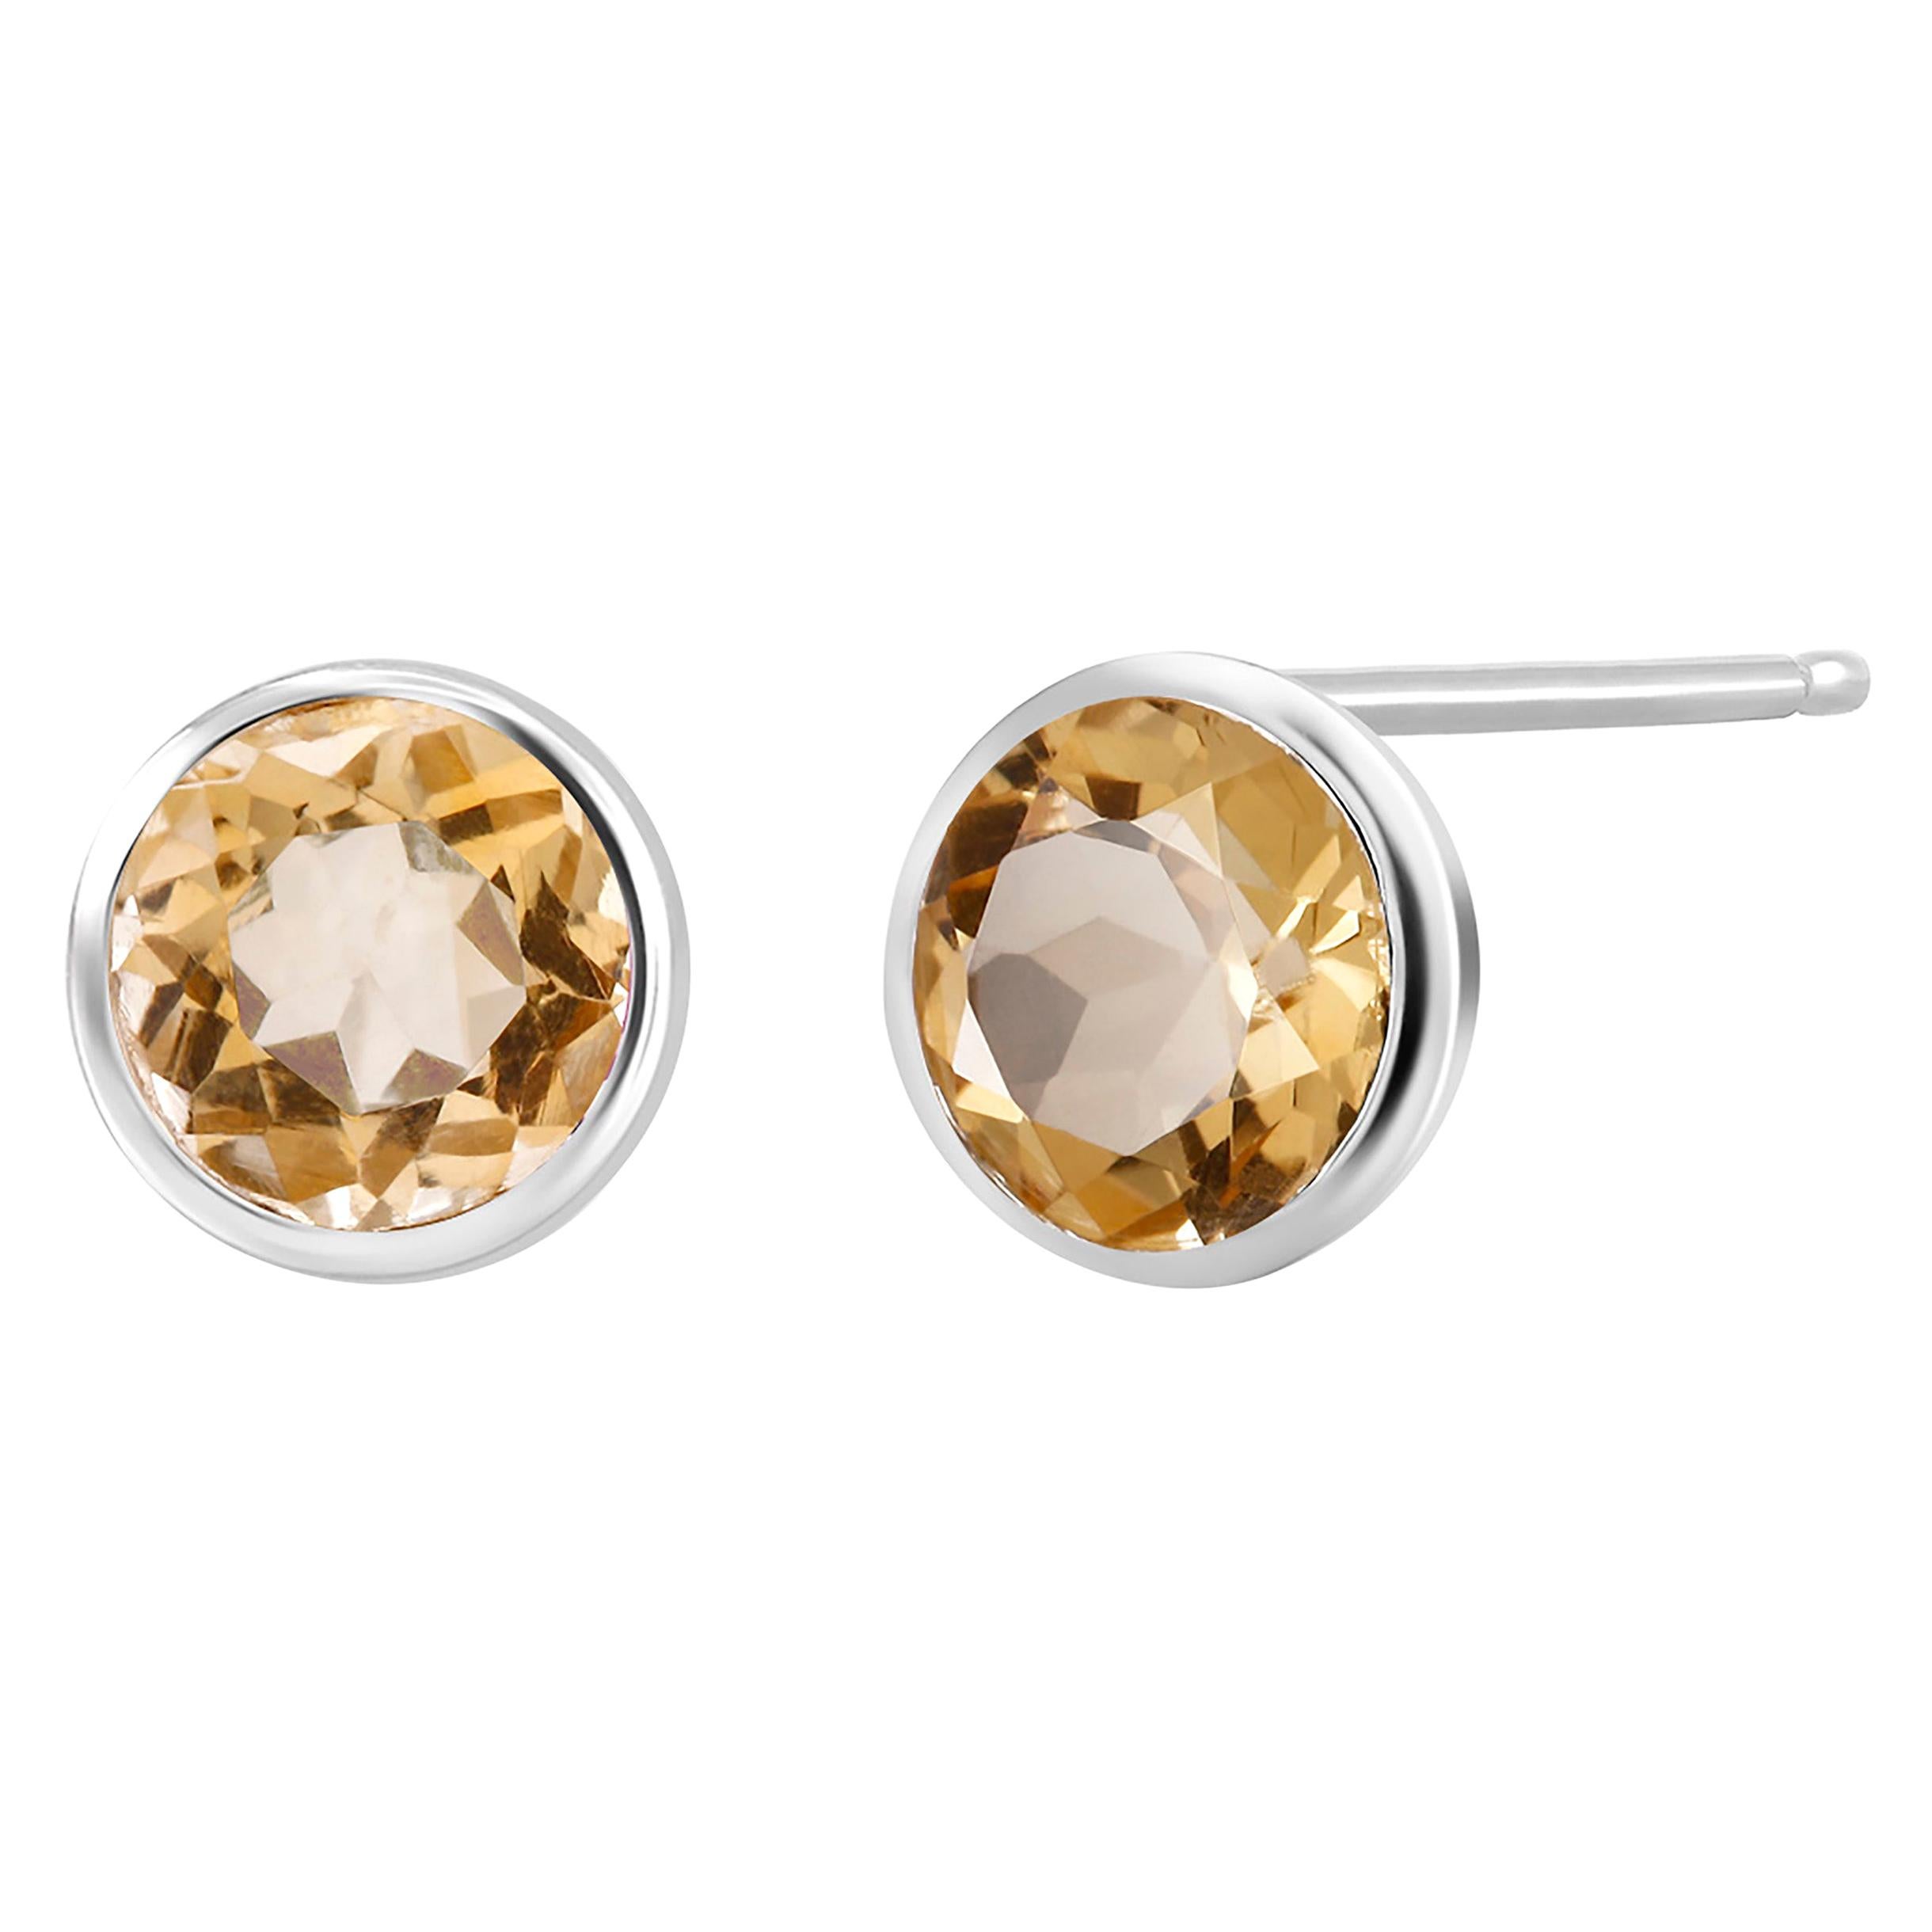 Round Pair of Yellow Citrine Bezel Set Silver Stud Earrings Weighing 6 Carat